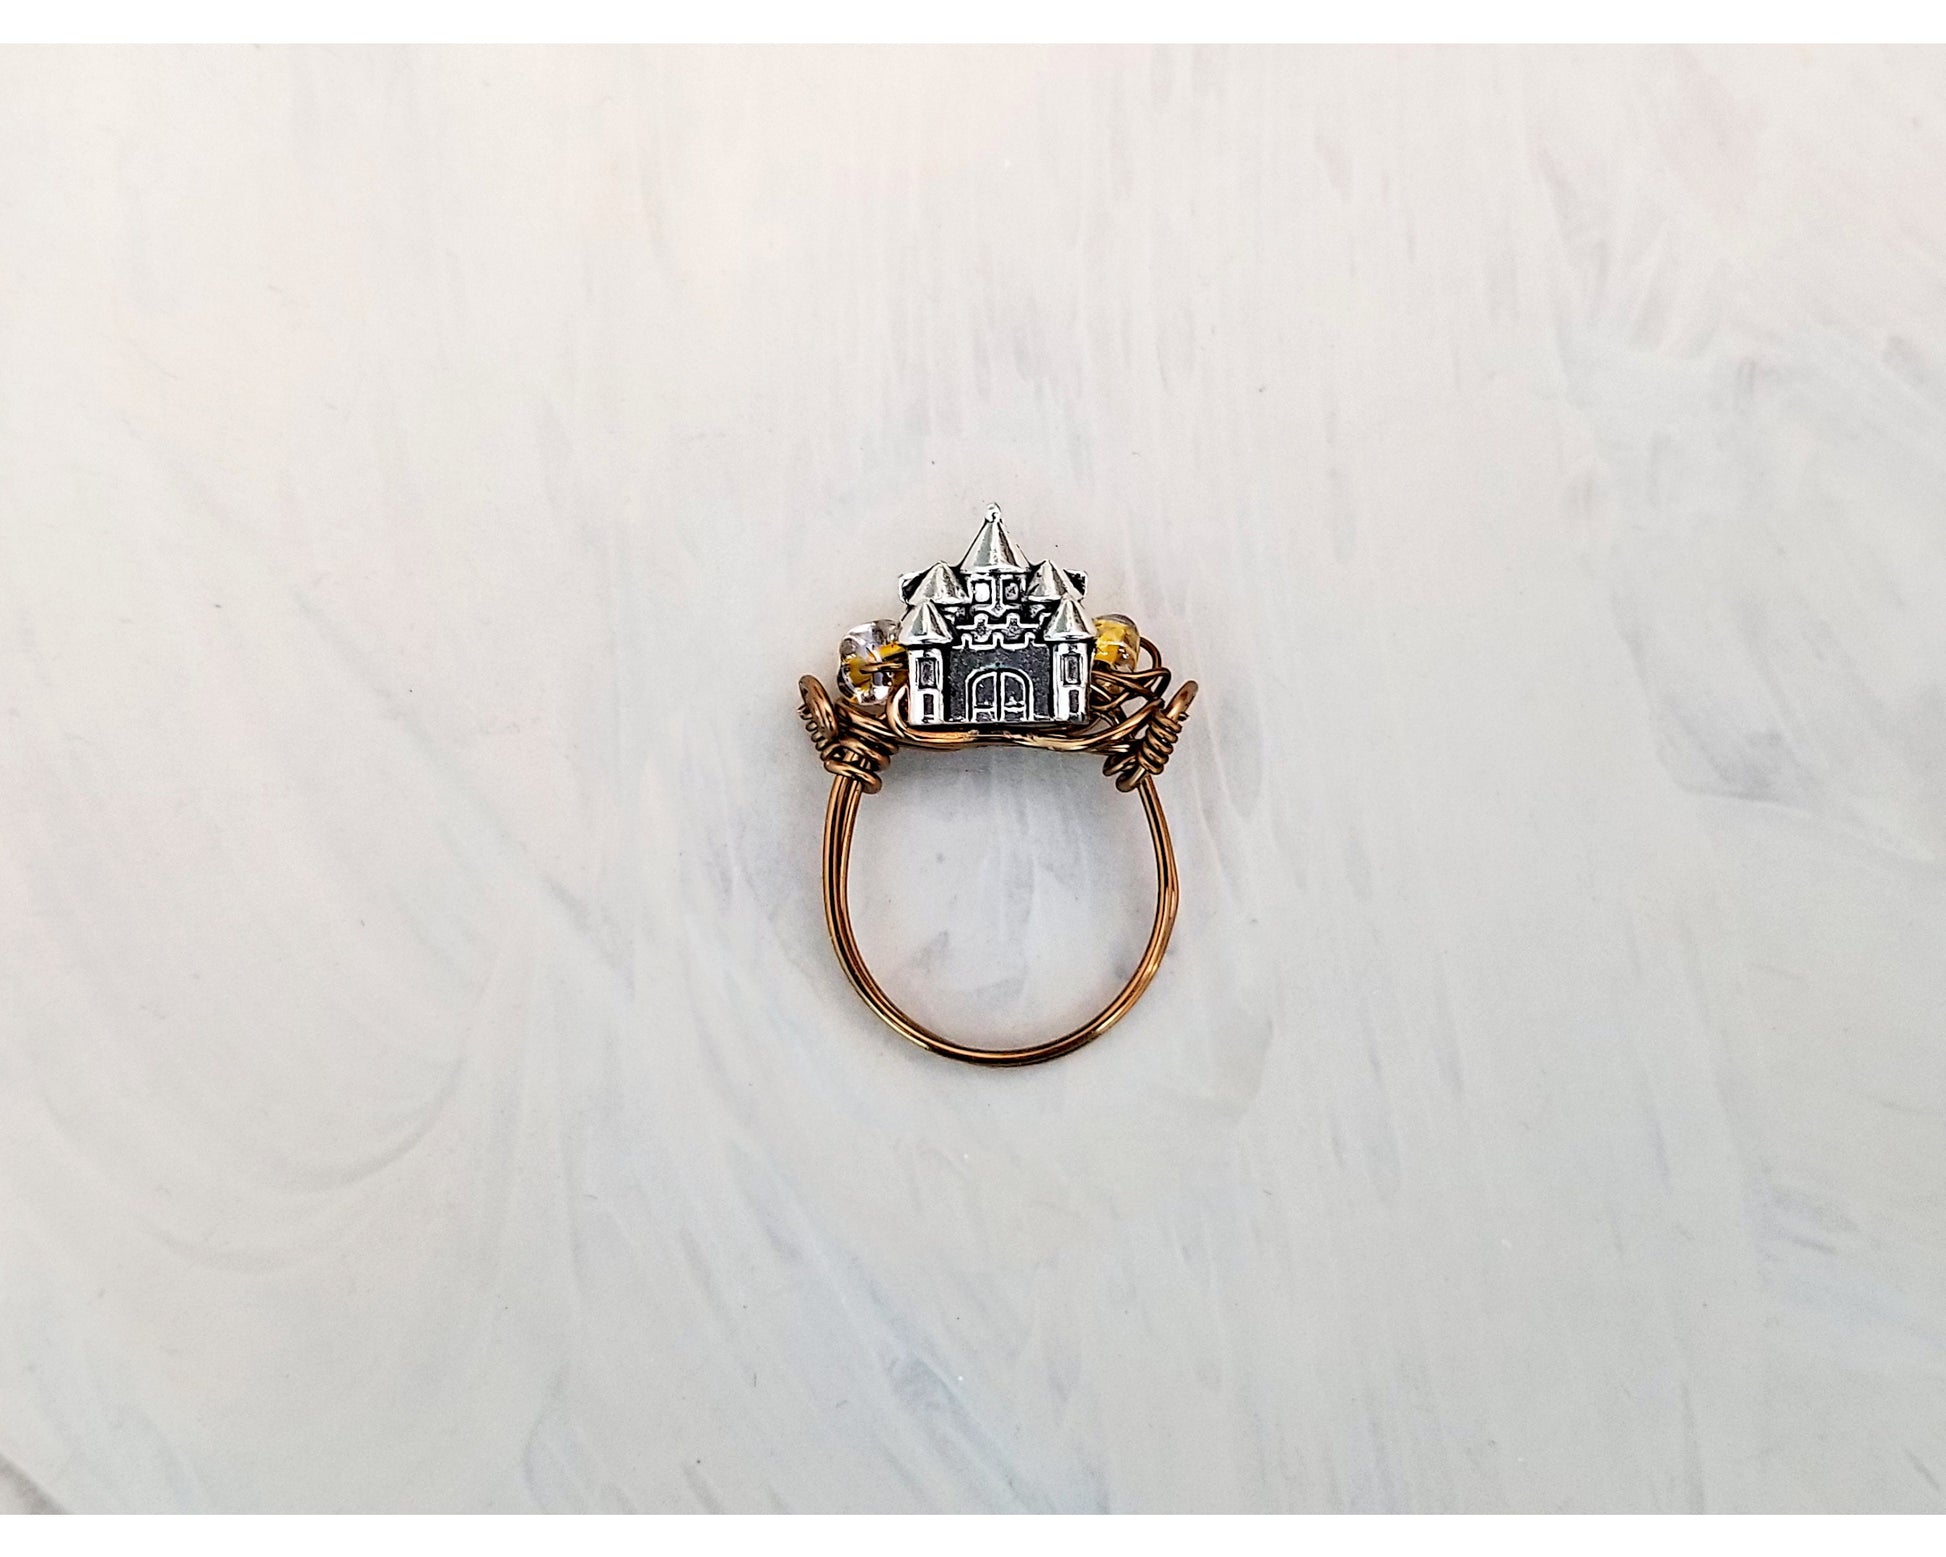 Castle Ring in Yellow, Fairy Tale, Wedding, Bridesmaid, Gothic, Renaissance, Medieval, Choice of Colors and Metals